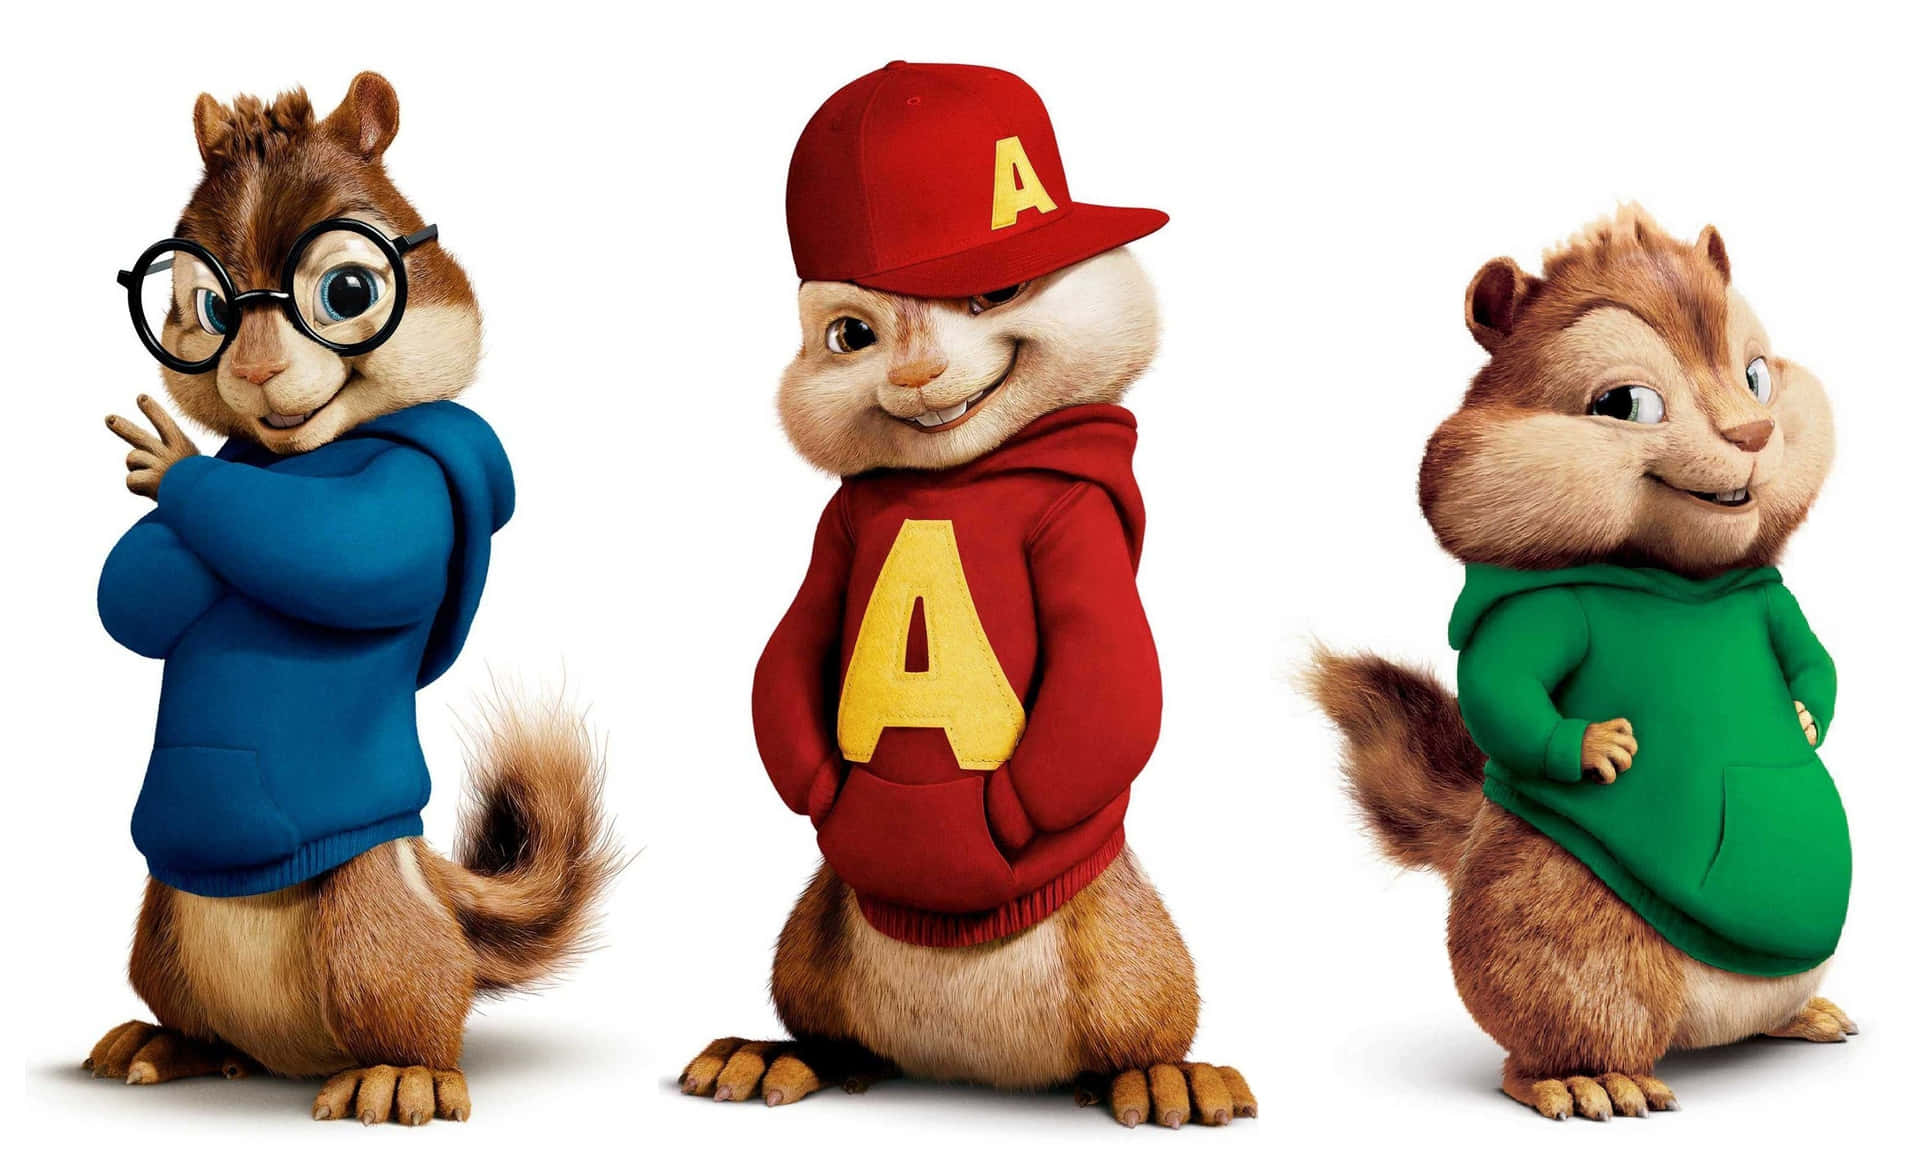 Alvin and the Chipmunks singing and dancing.